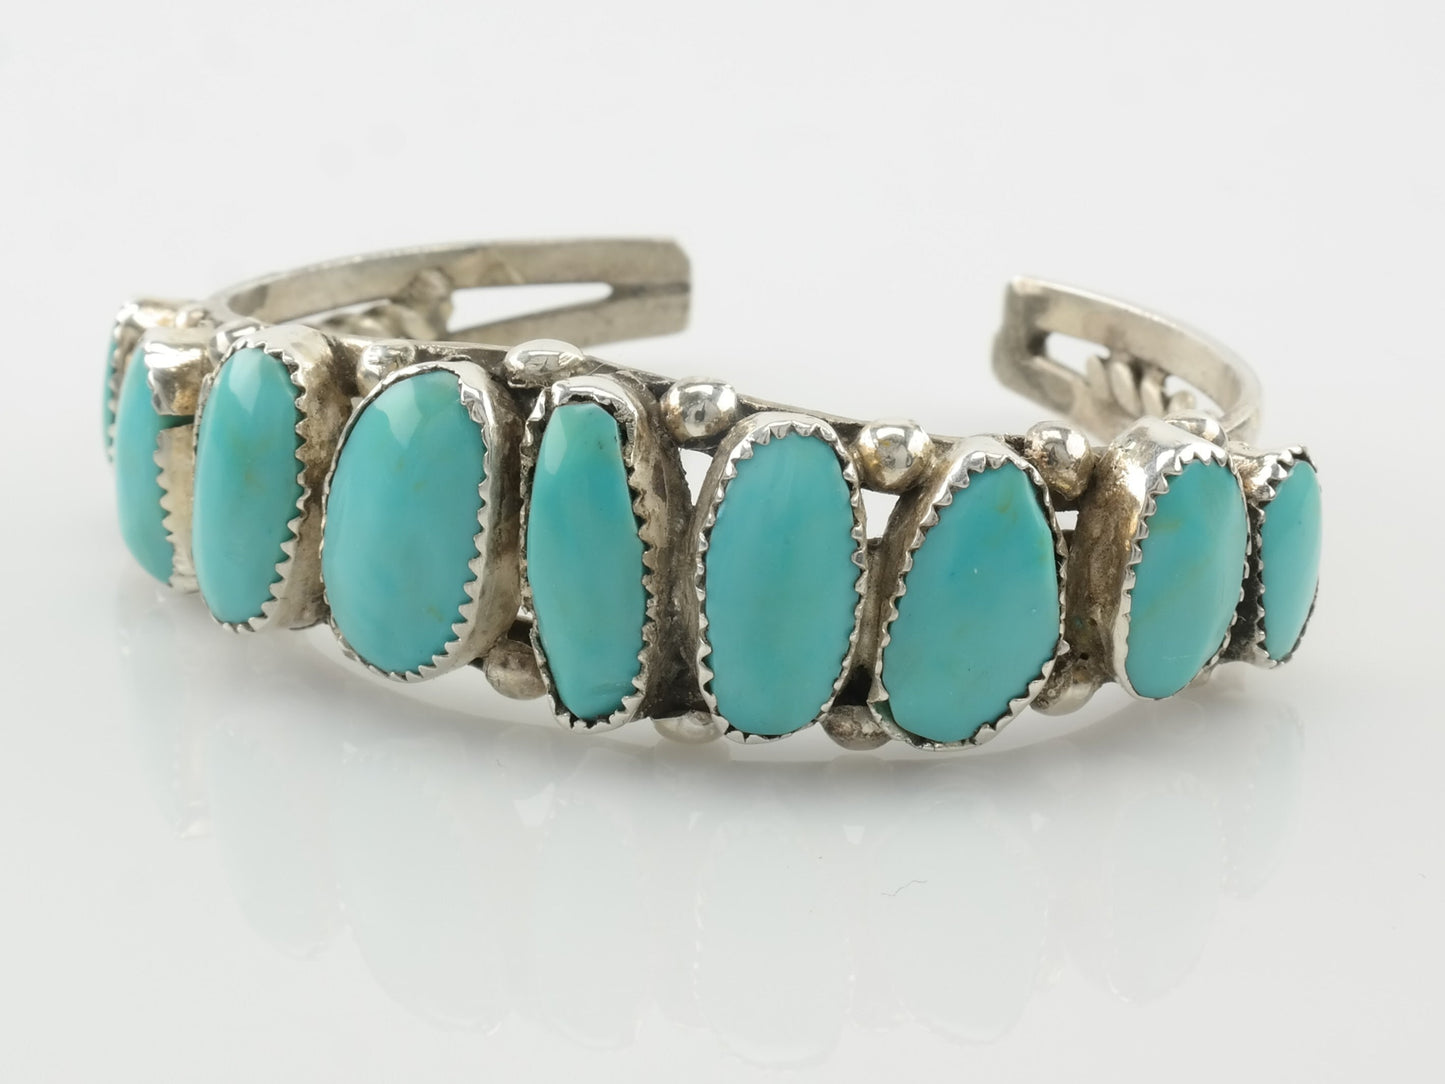 Native American Sterling Silver Turquoise Row Cuff Bracelet Sleeping Beauty